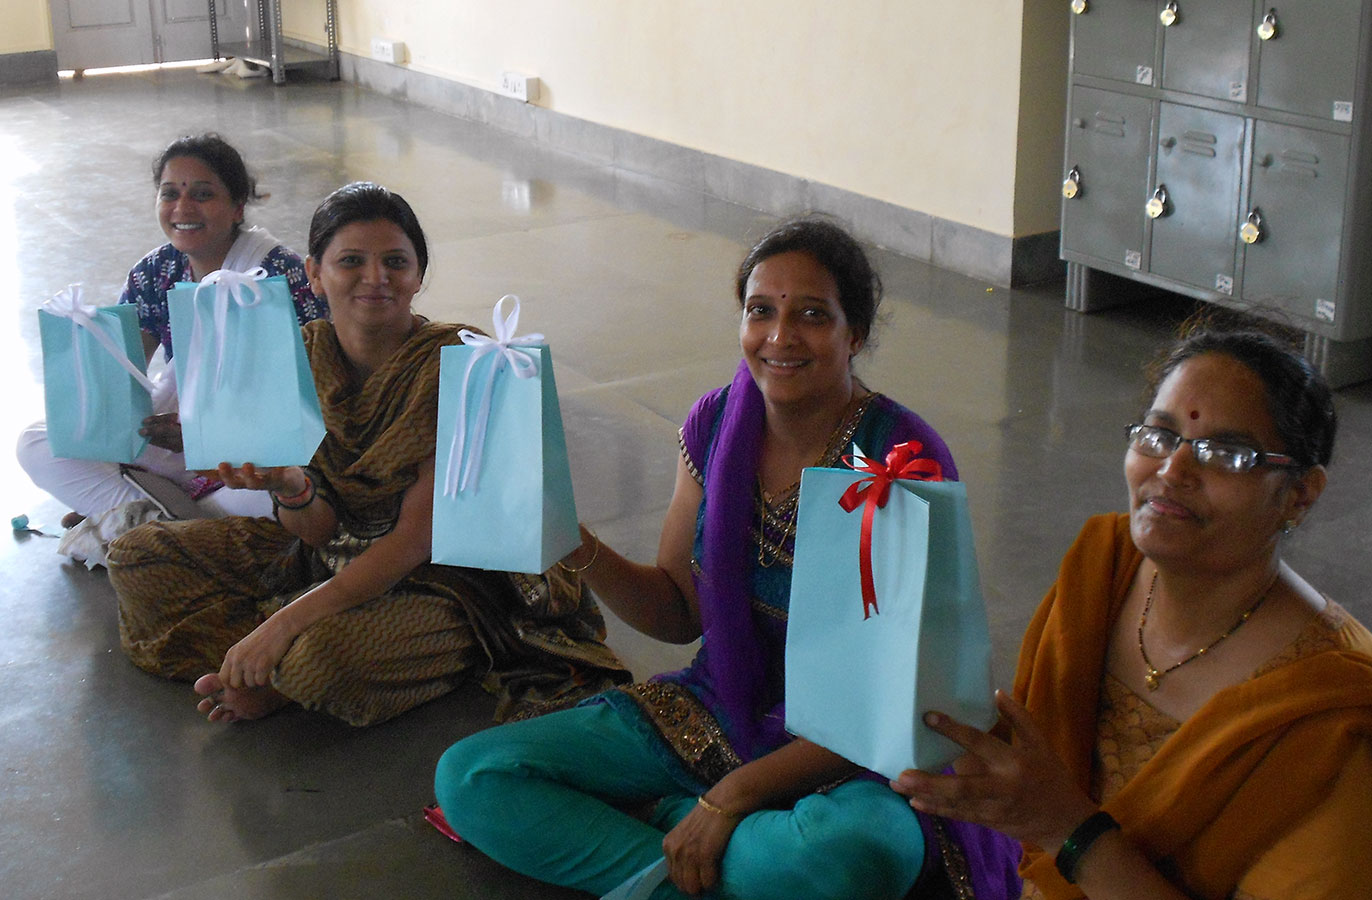 Paper bags with colourful ribbons made by the beneficiaries